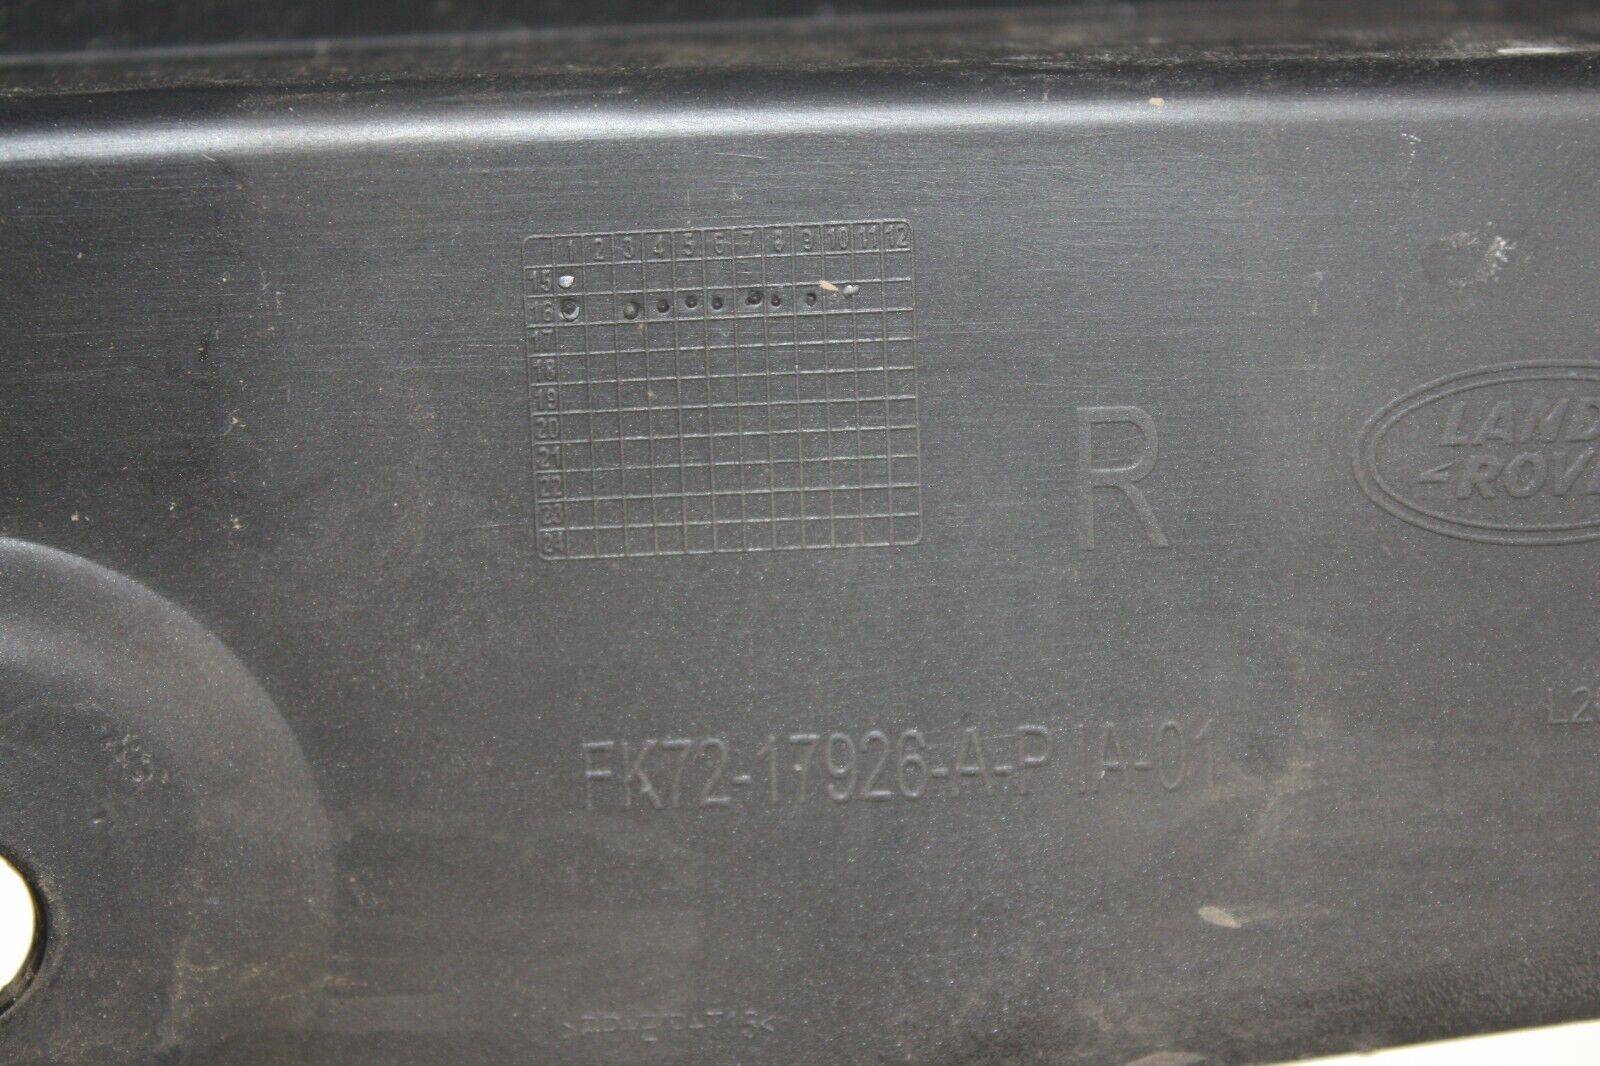 Land-Rover-Discovery-Sport-Rear-Right-Corner-FK72-17926-A-Genuine-175367542215-7